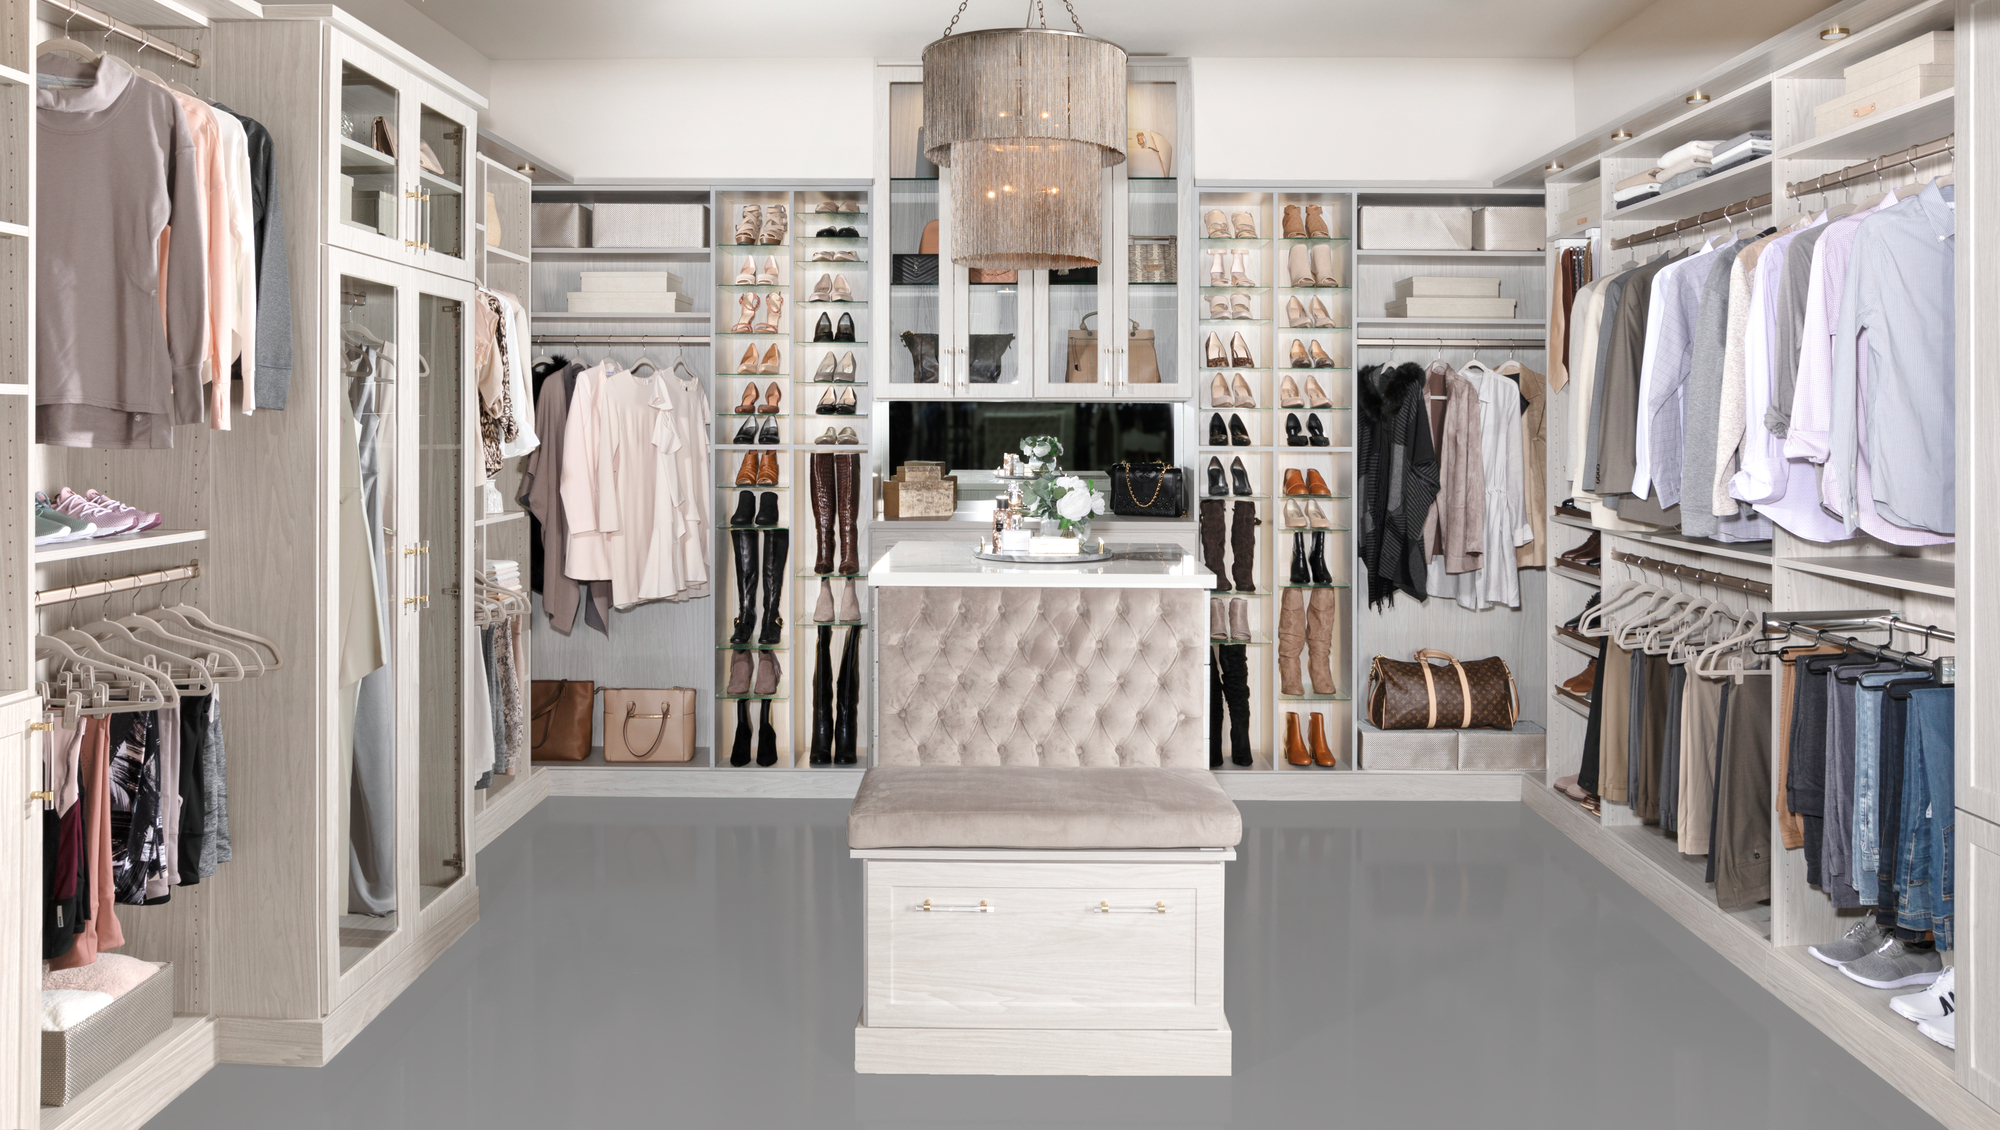 Boutique custom closet solution who shoe shelving, hutch and bench seating from Inspired Closets